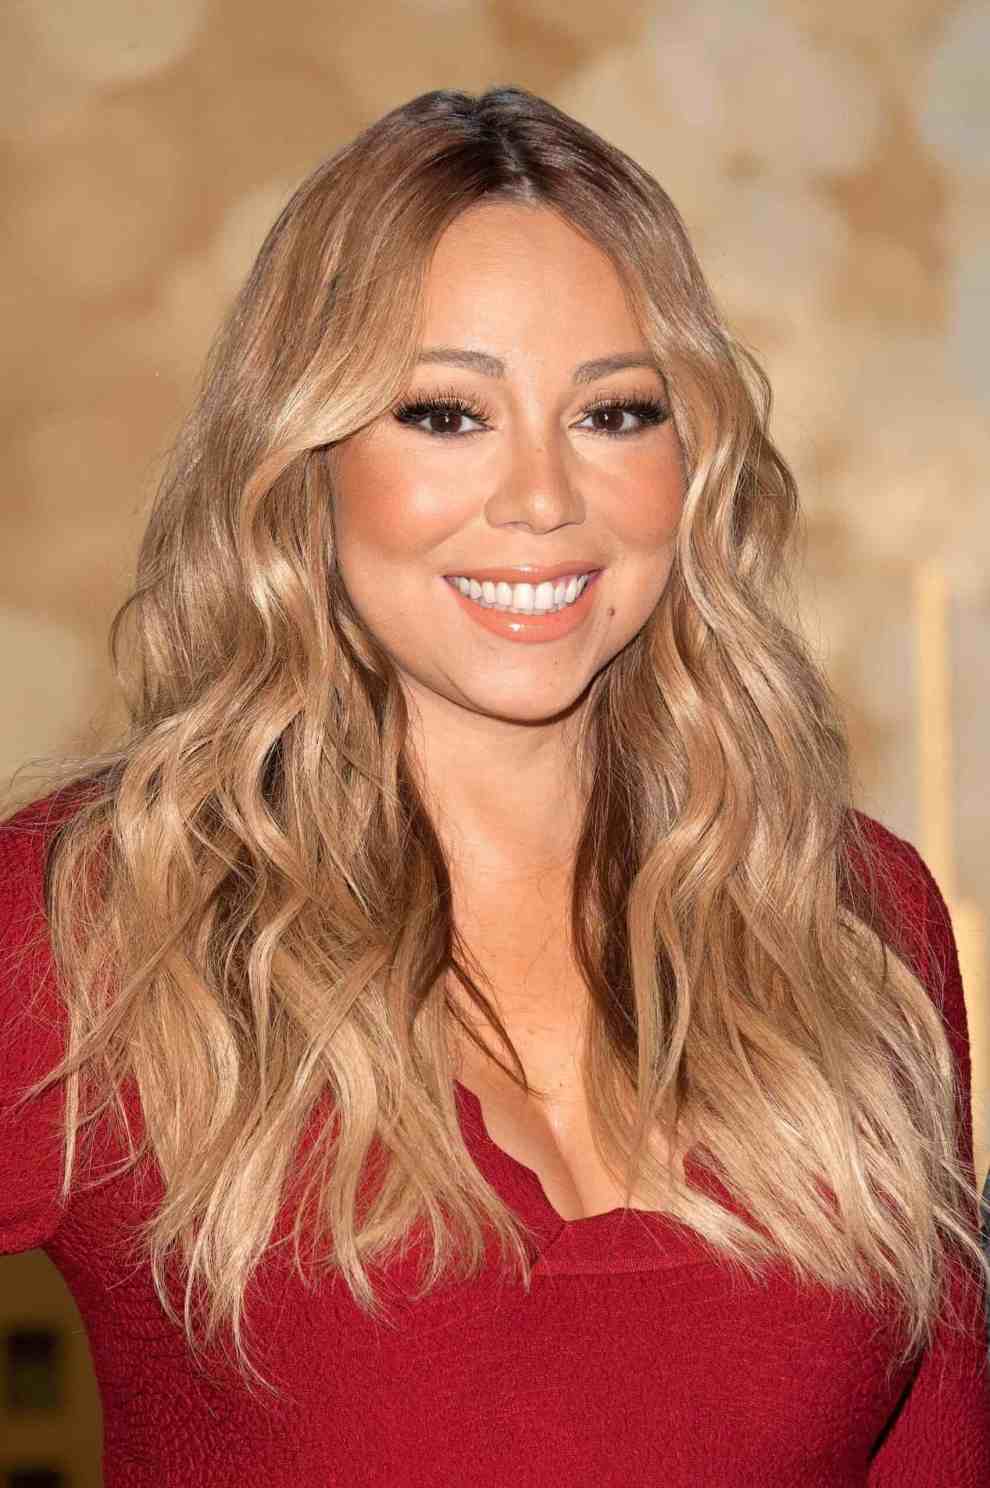 Mariah Carey attends the Pier 1 Imports Pop-up Store launch event in December 2015